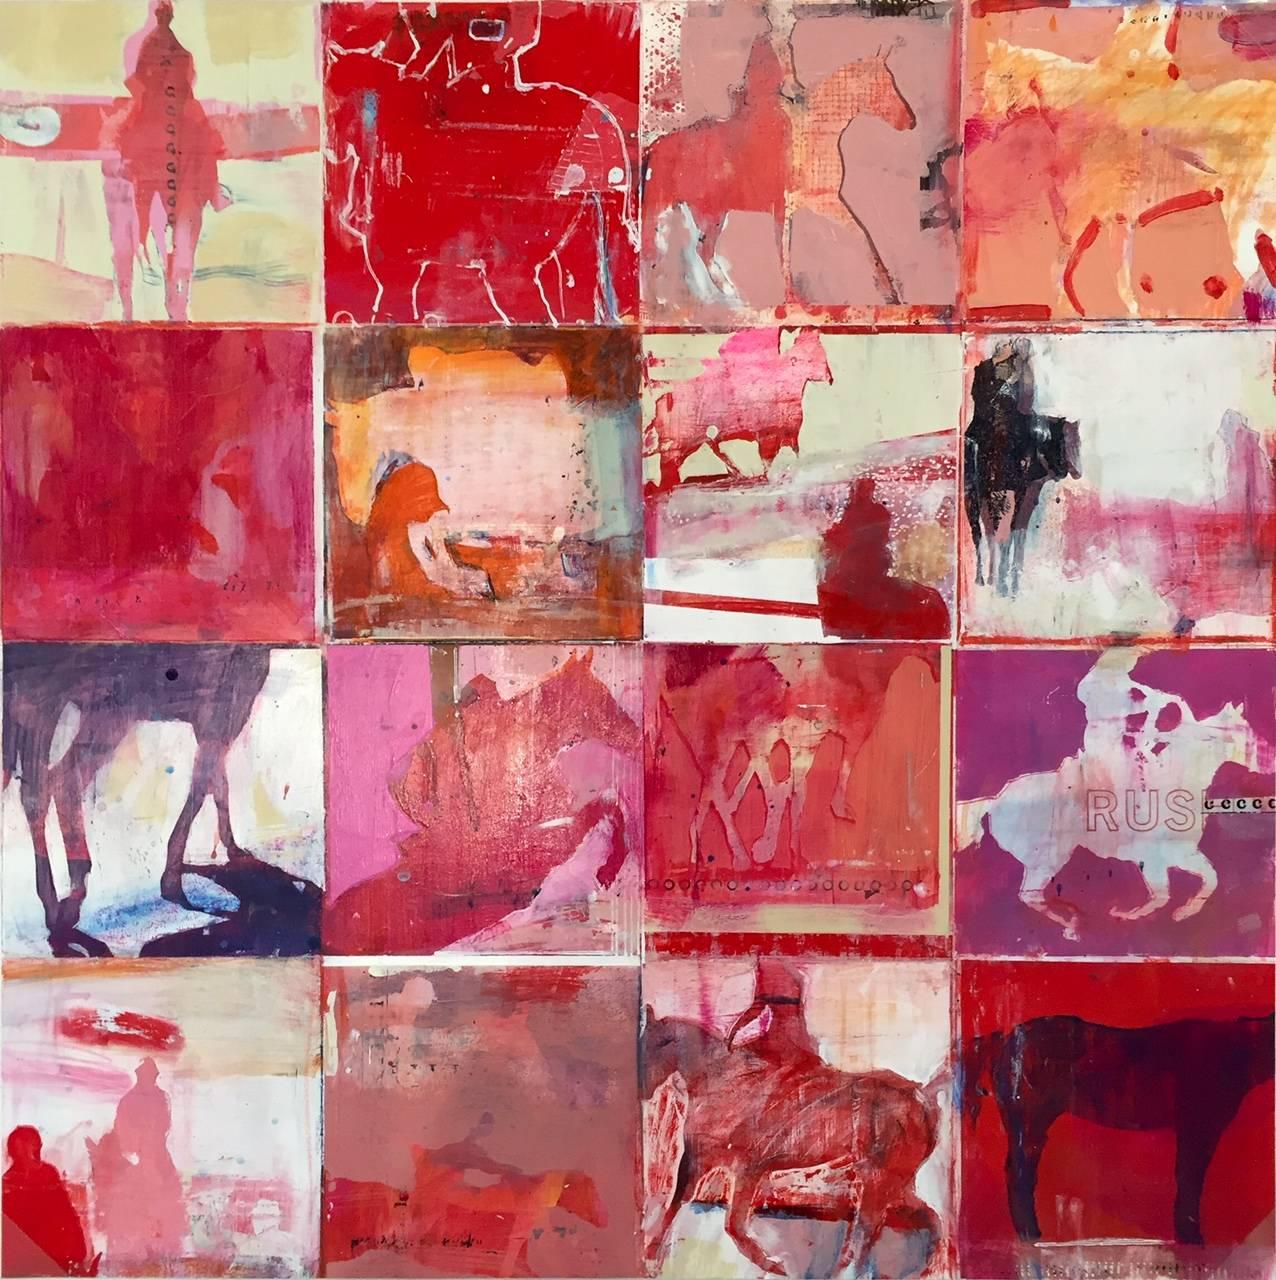 Reds In Overdrive: Horse Grid / original large acrylic painting